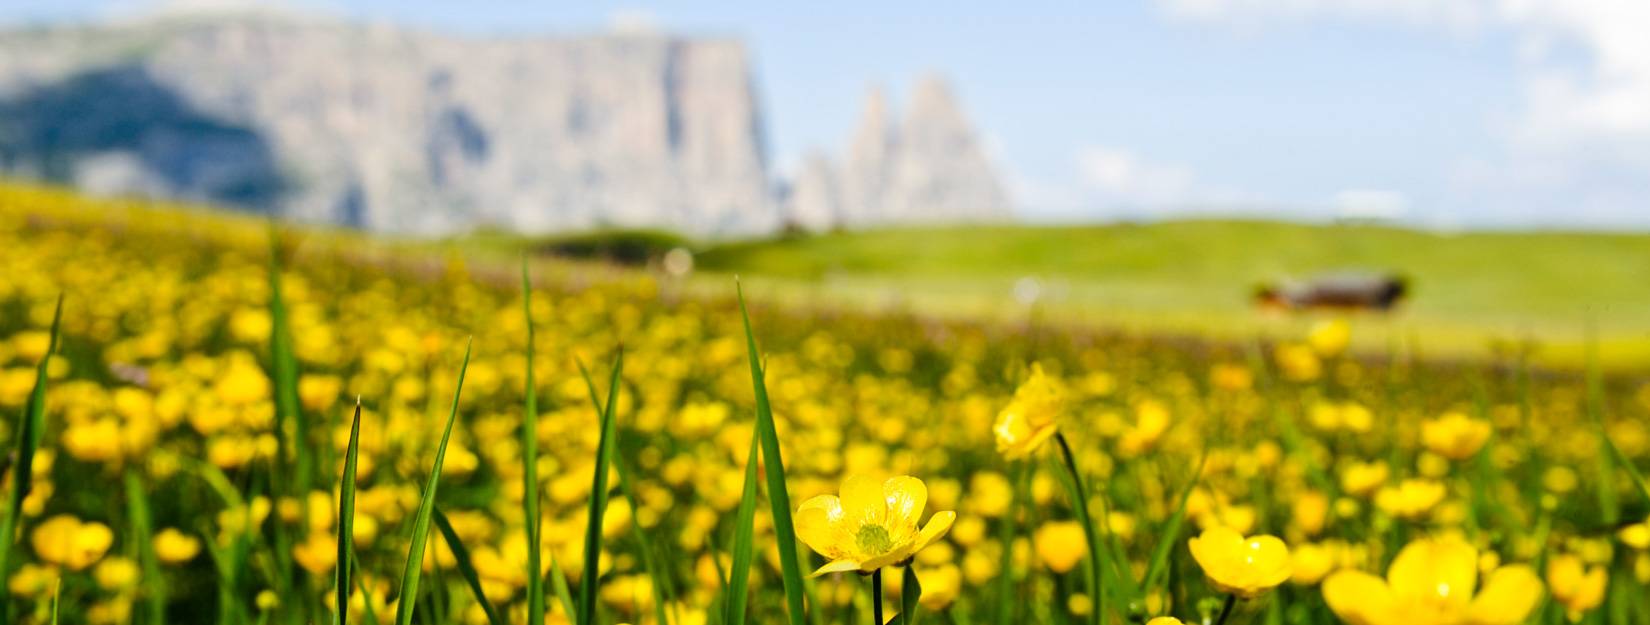 Book your room at the gate of Alpe di Siusi here!